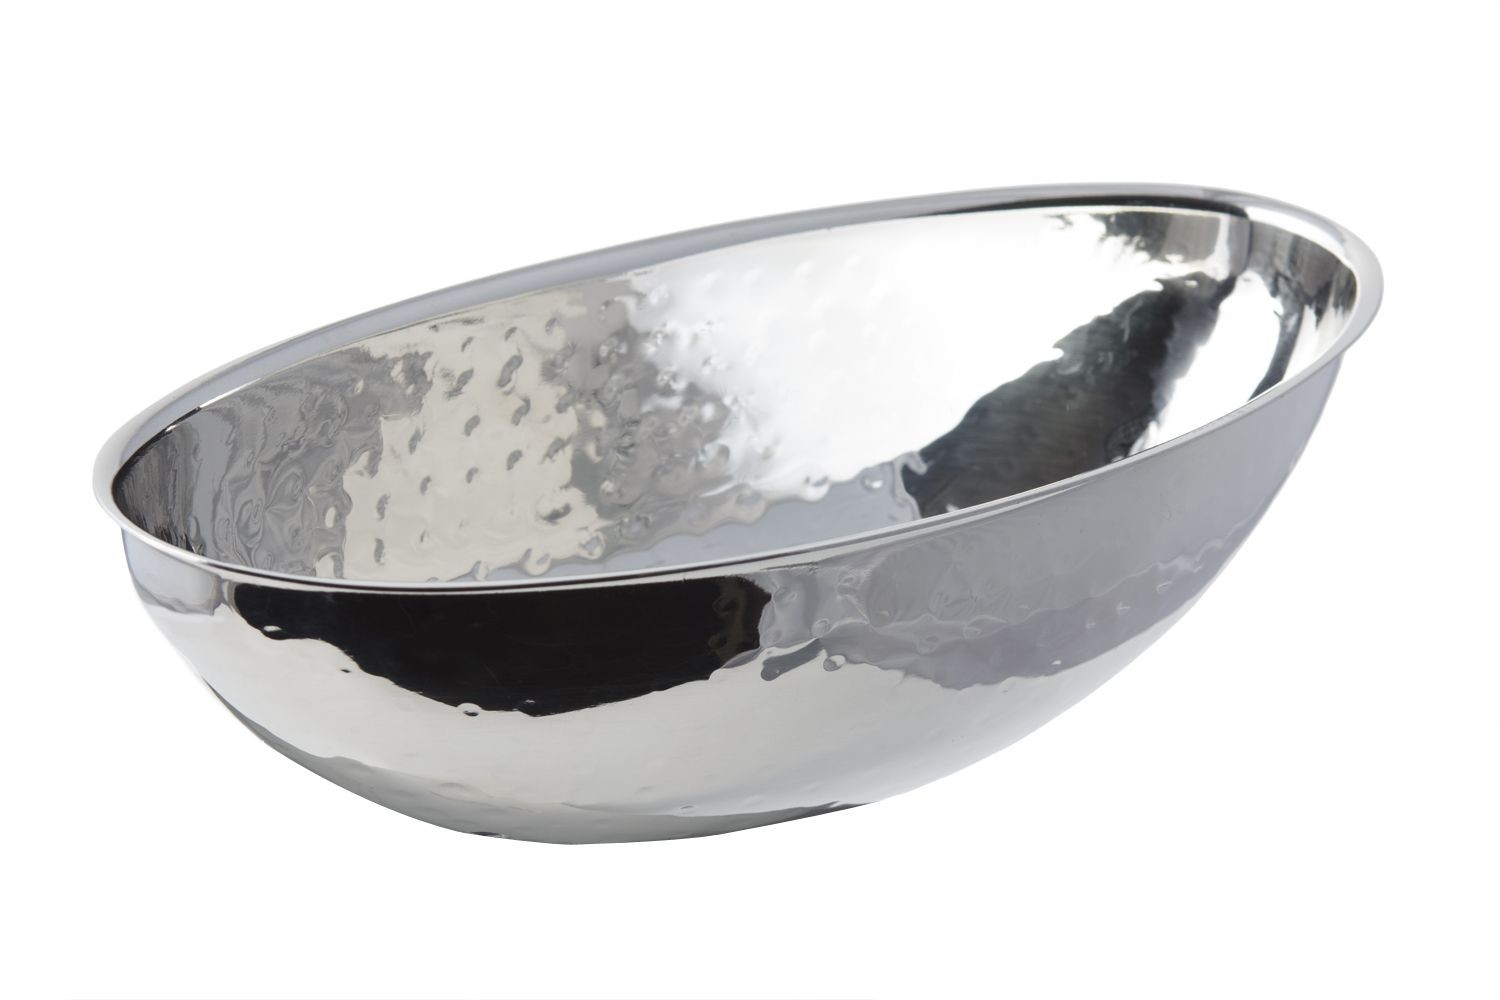 Bon Chef 61214 Stainless Steel  Nut Bowl with Hammered Finish, 20 oz.